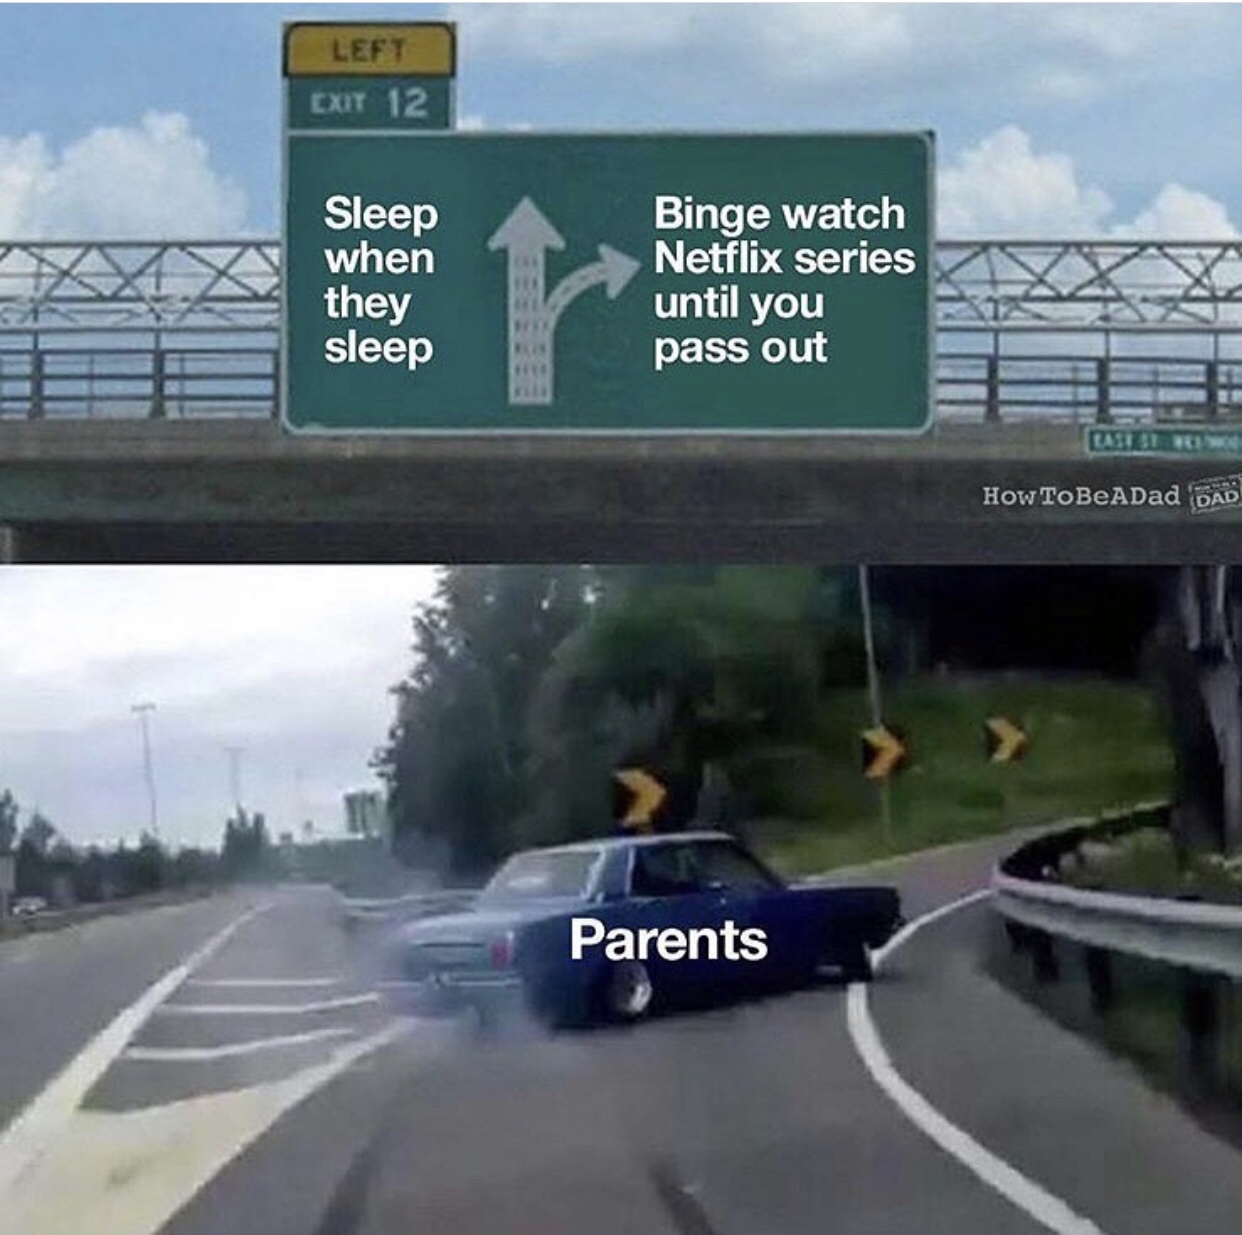 new memes reddit - Left Exit 12 Sleep when they sleep Binge watch Netflix series until you pass out HOWTOBEADad Dad Parents